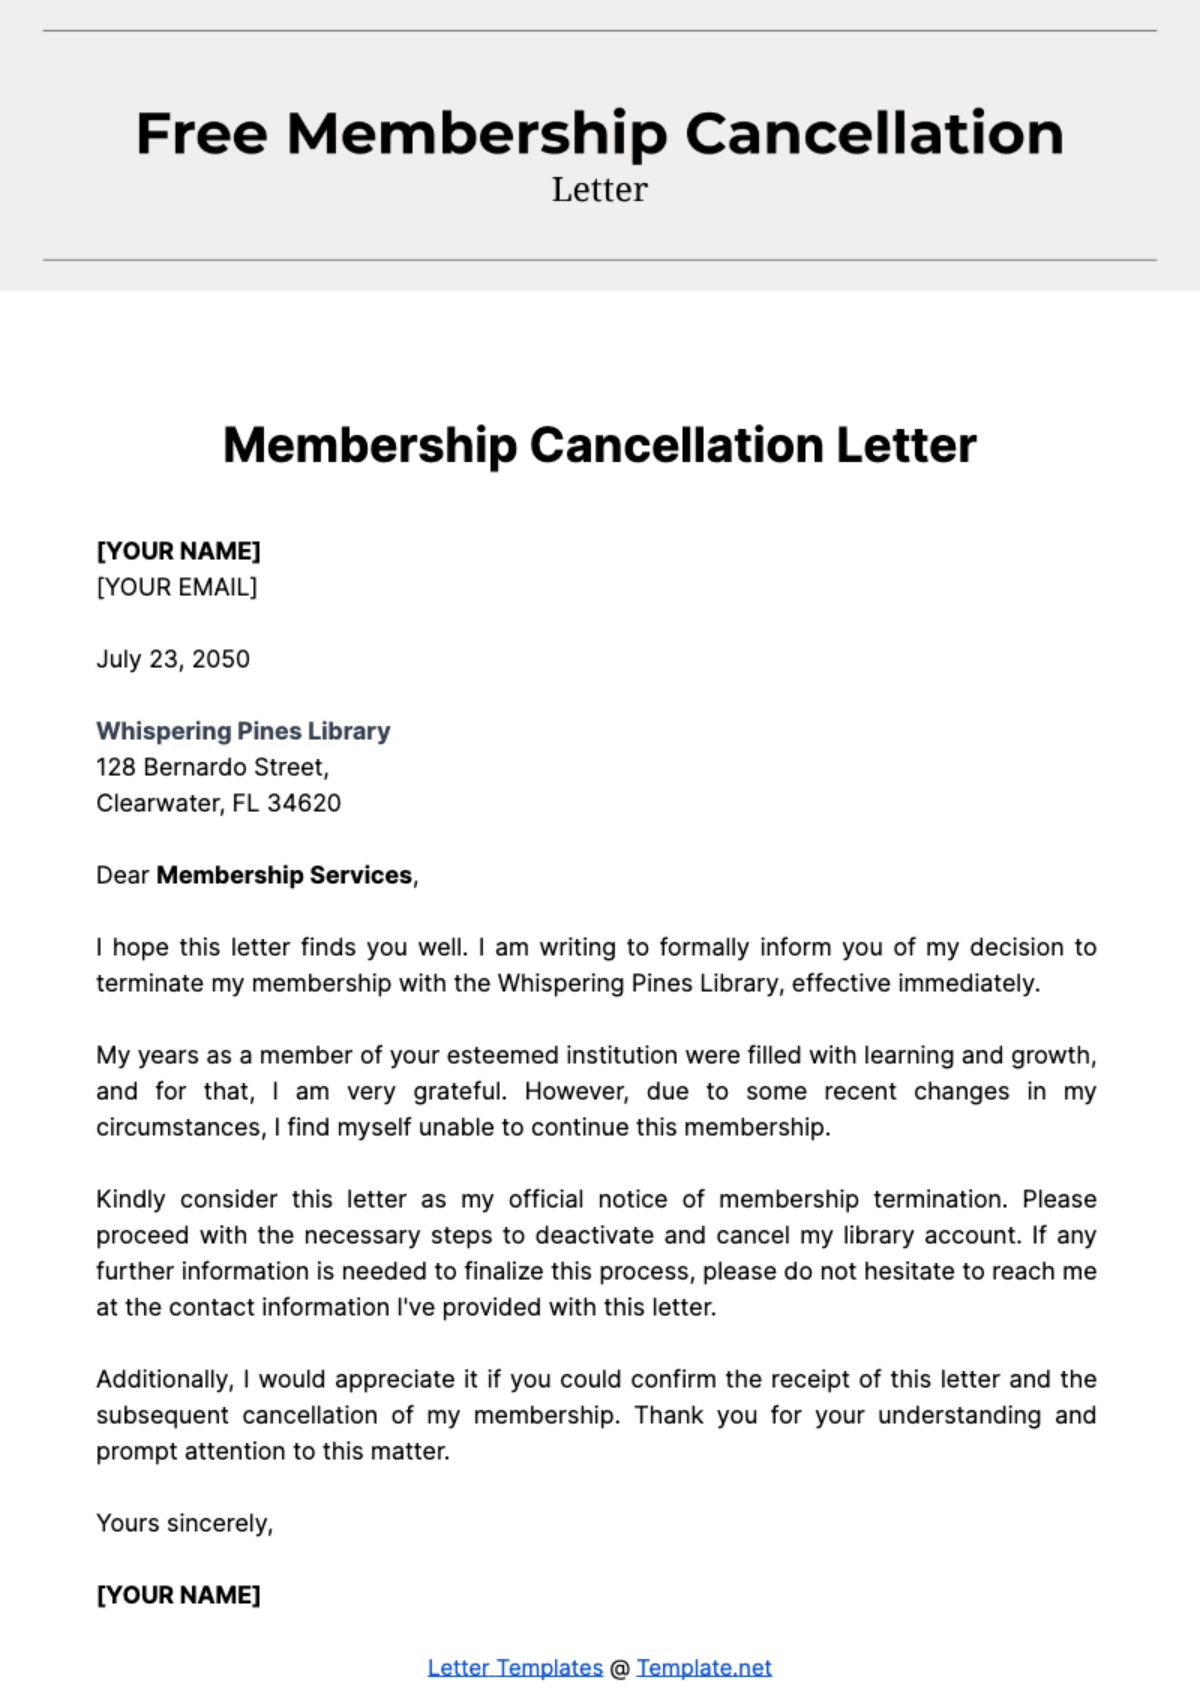 Free Membership Cancellation Letter Template